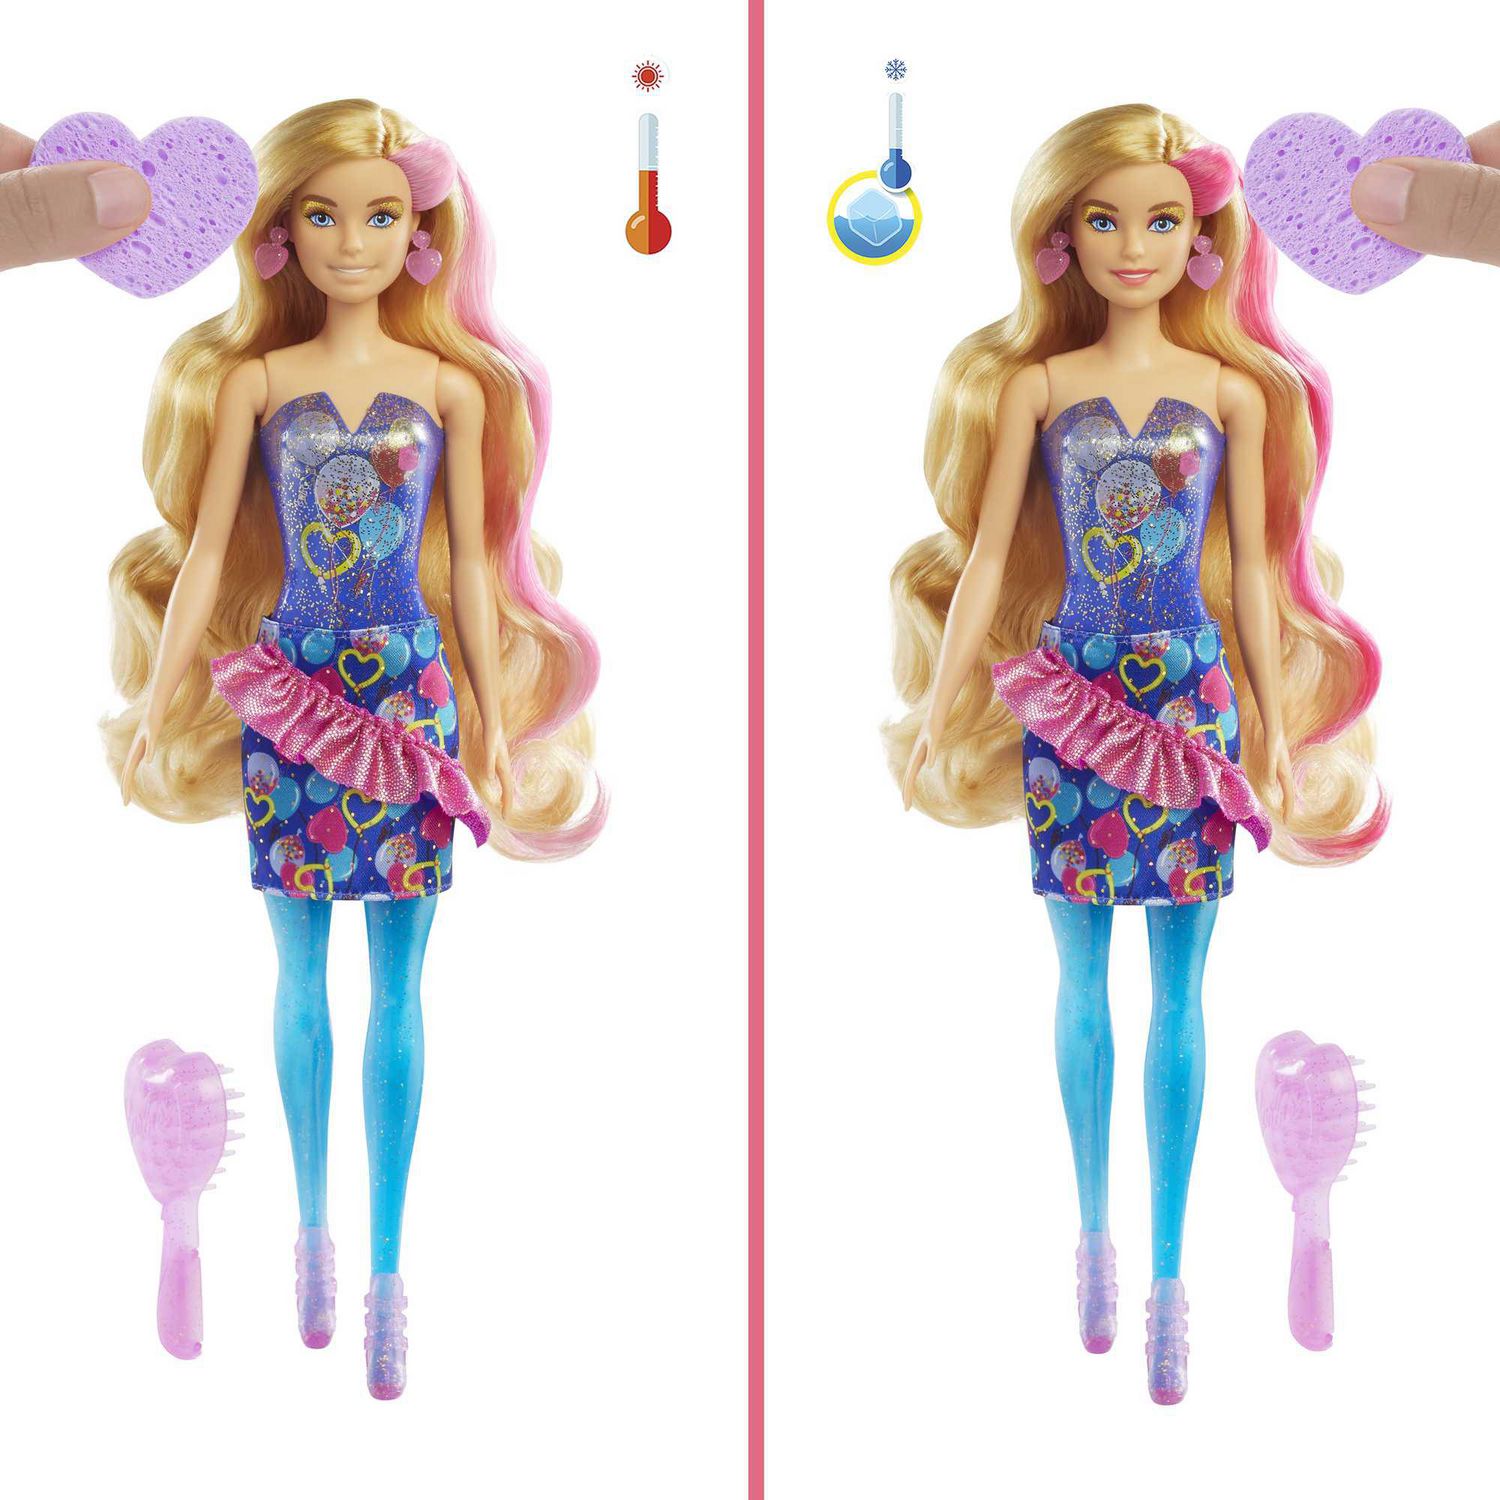 Barbie Color Reveal Doll with 7 Surprises: 4 Bags Contain Skirt, Shoes,  Earrings & Brush; Water Reveals Confetti-Print; Doll’s Look & Color Change  on